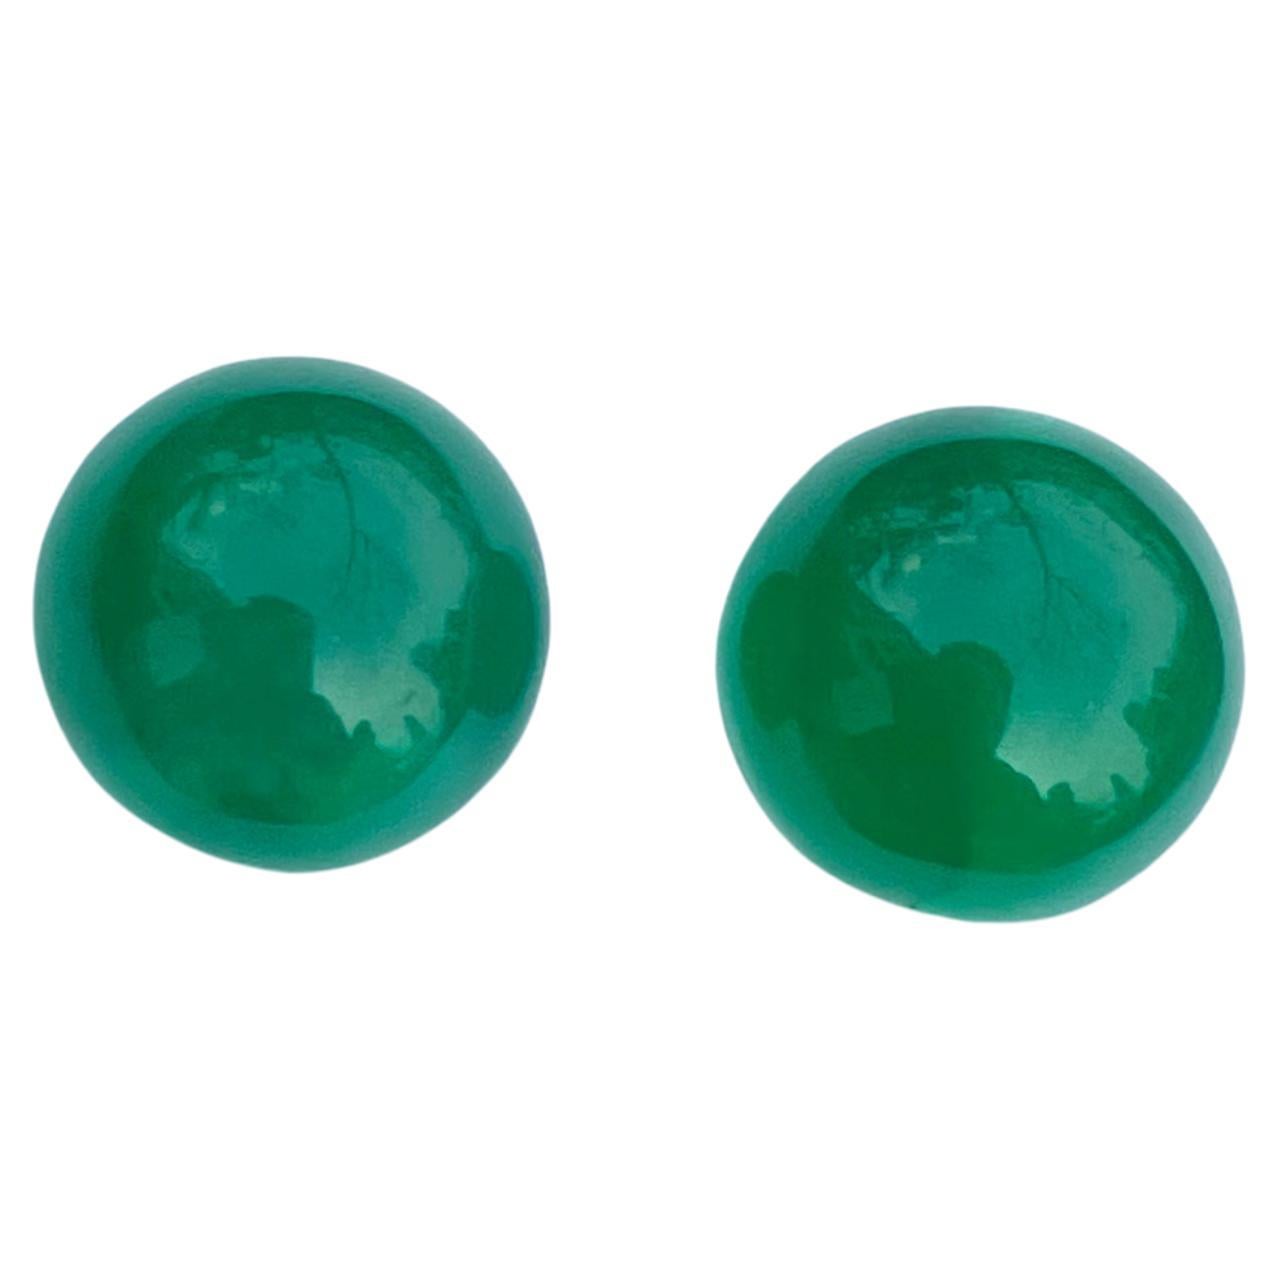 Beautiful Green Agate Pair Gemstone 7.25 Carats Round Shape Indian Gemstone  For Sale